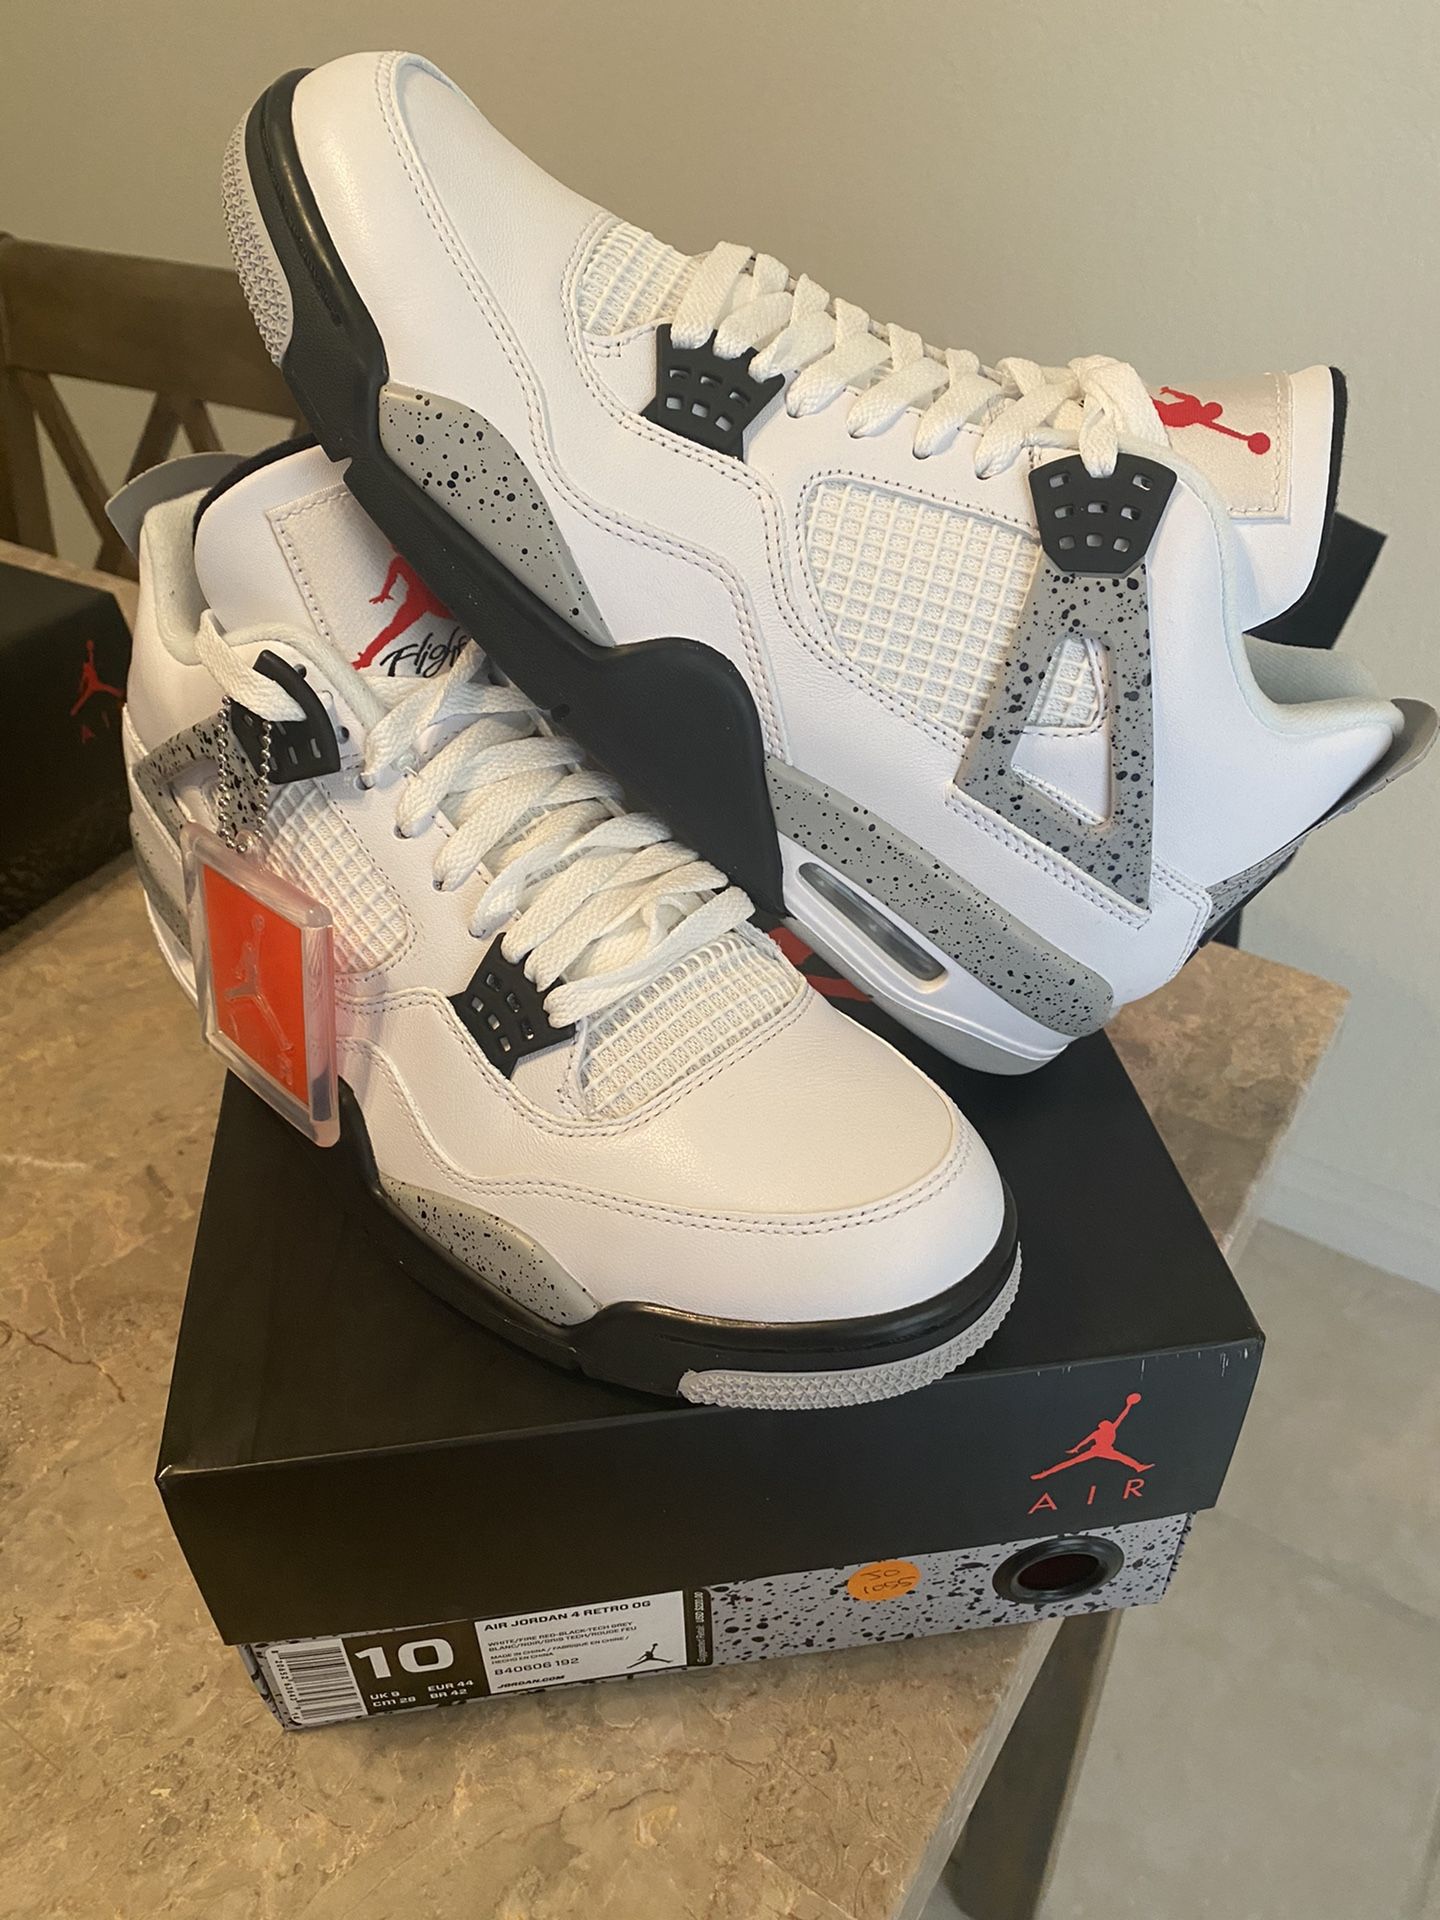 Air jordan 4 White cement Nike Air NEW DS size 10 100% authentic